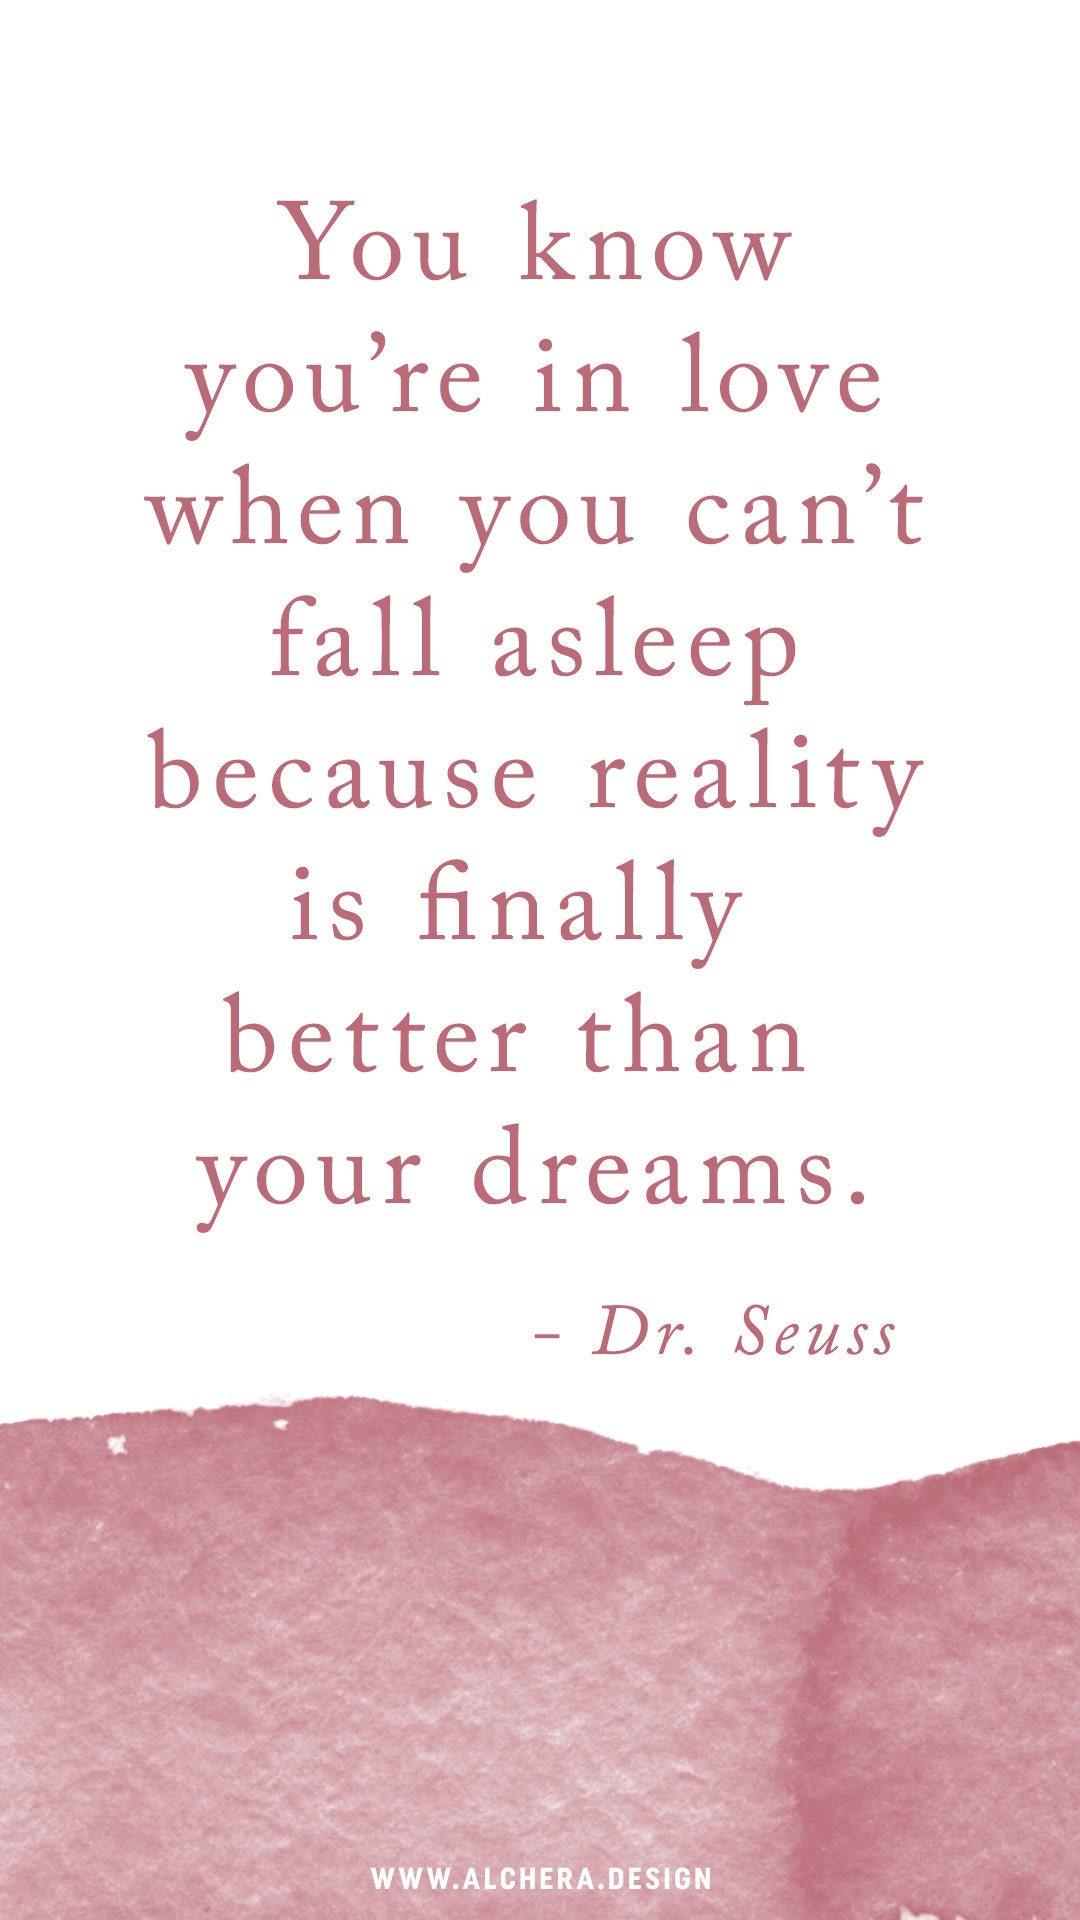 You know youre in love when you cant fall asleep because reality is finally better than your dreams